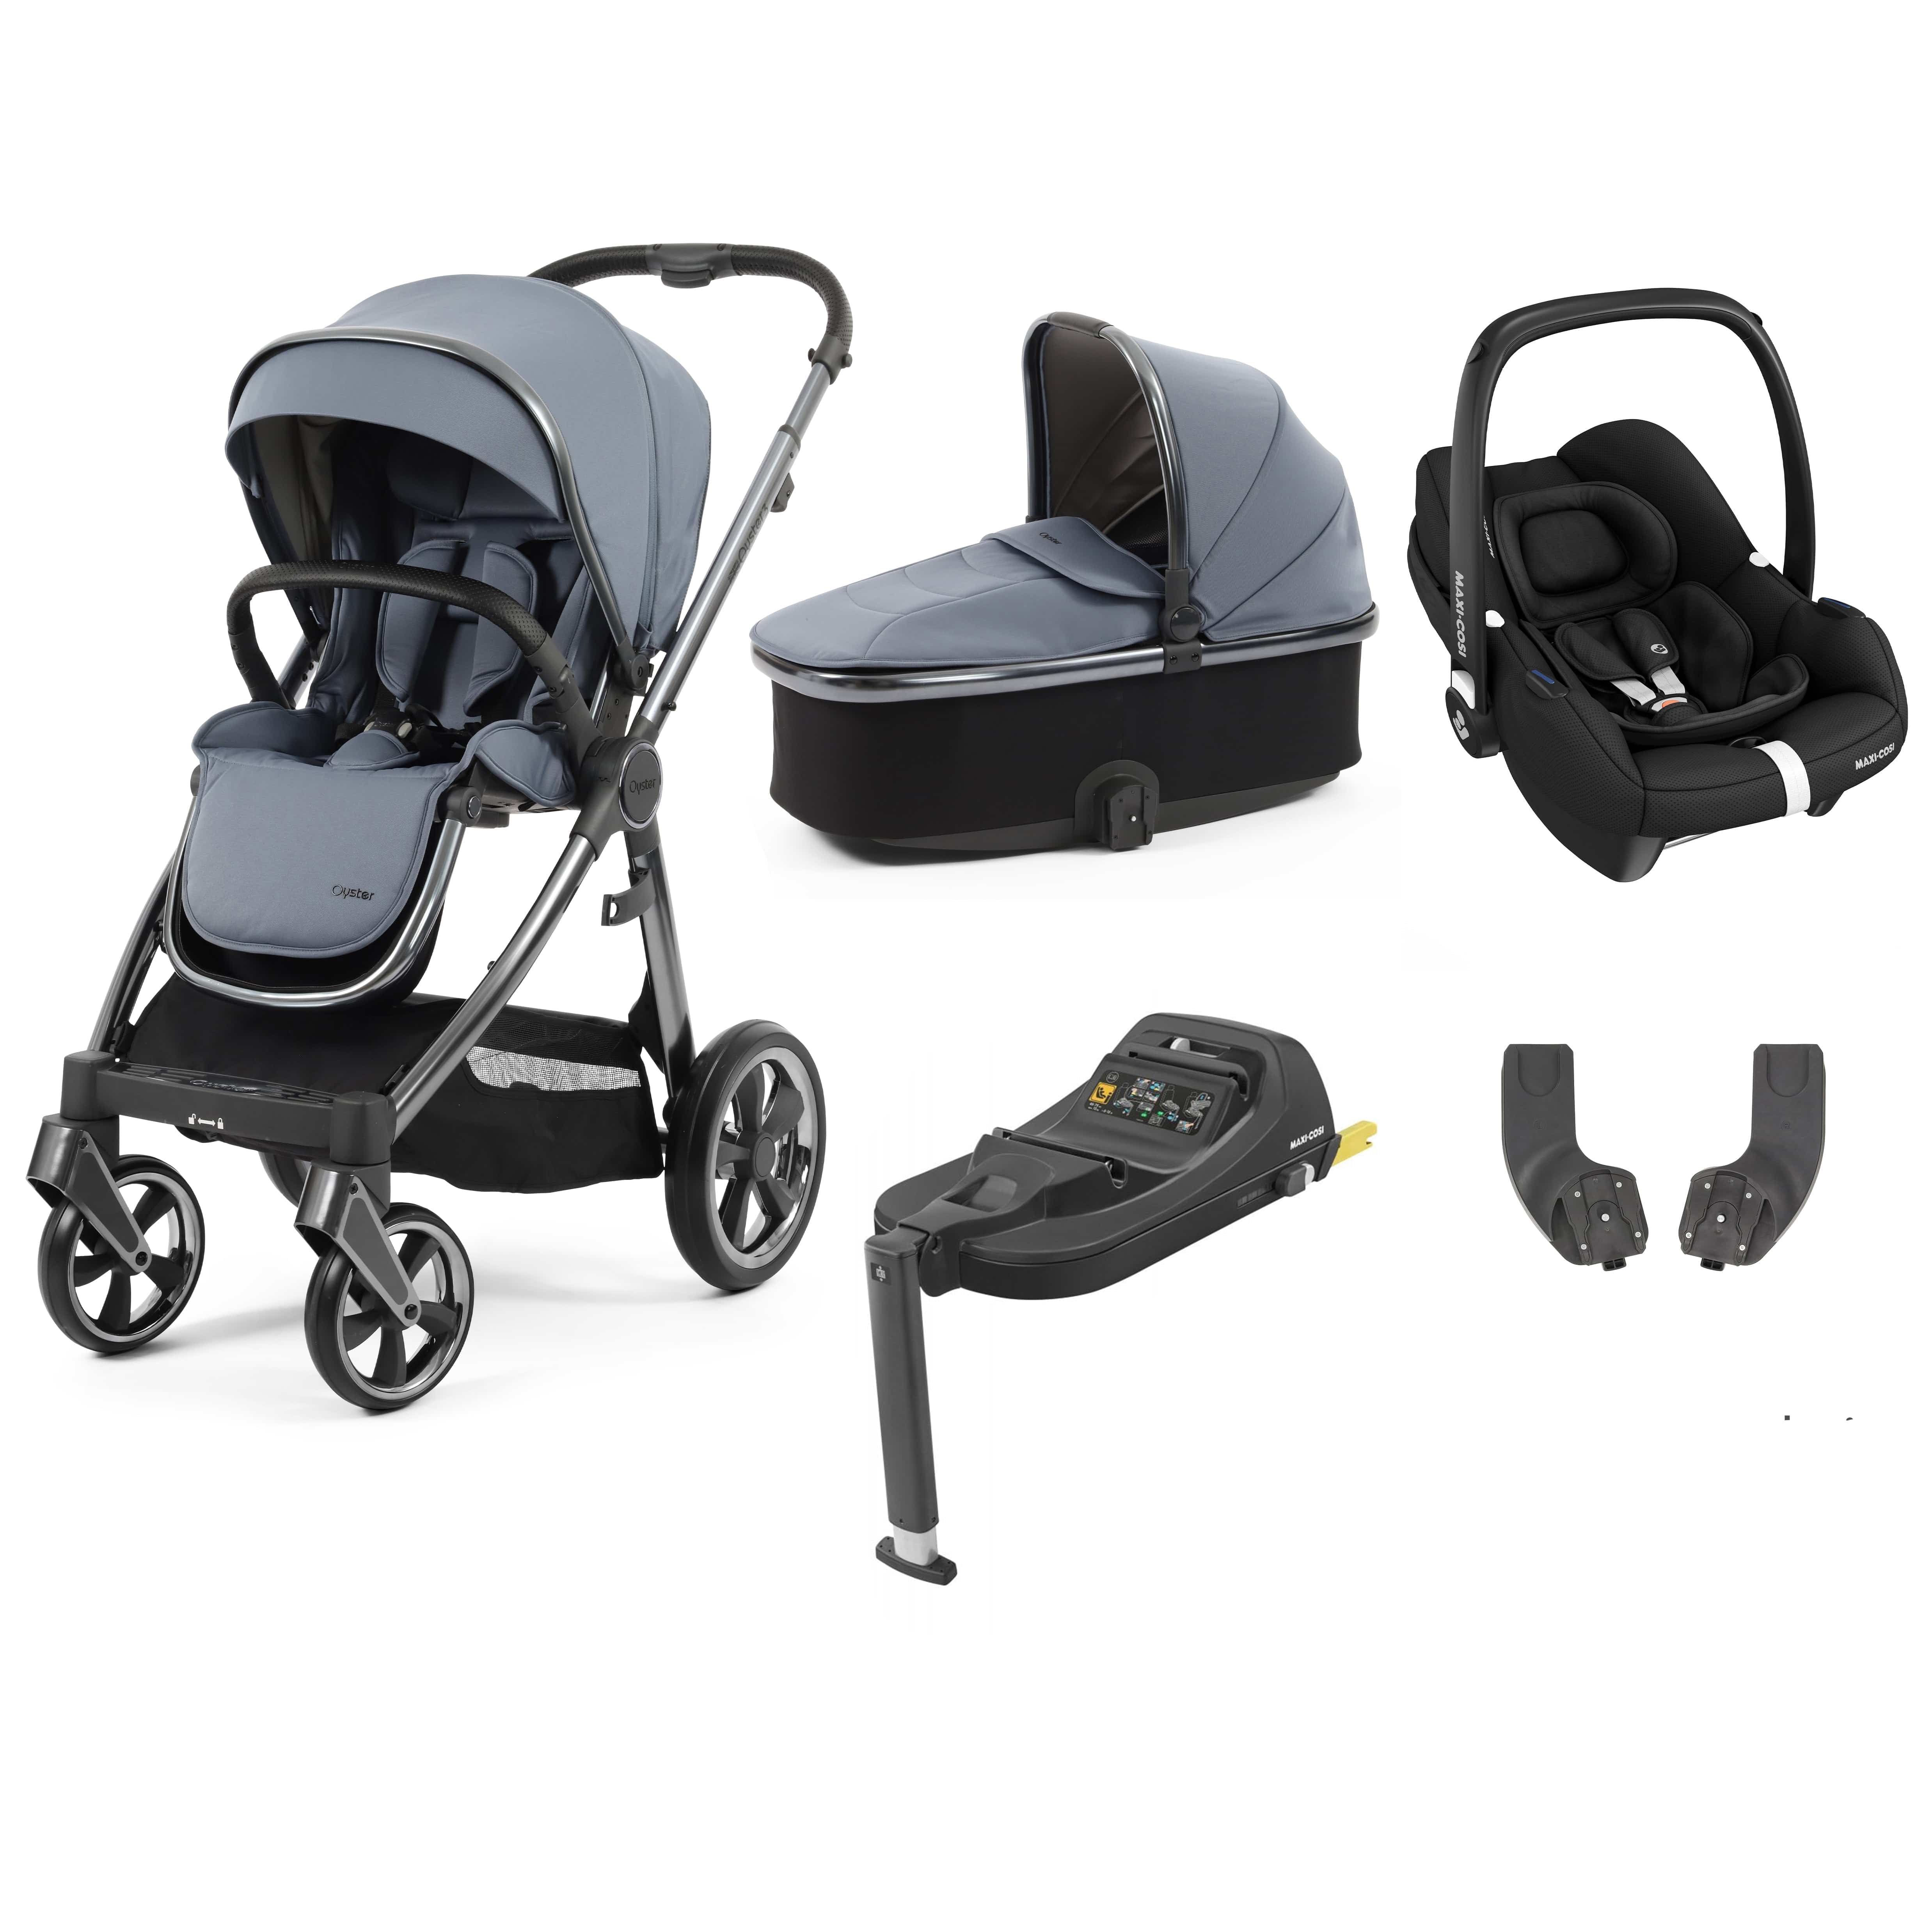 Babystyle Oyster 3 Essential Bundle with Car Seat in Dream Blue Travel Systems 14763-DMB 5060711567228